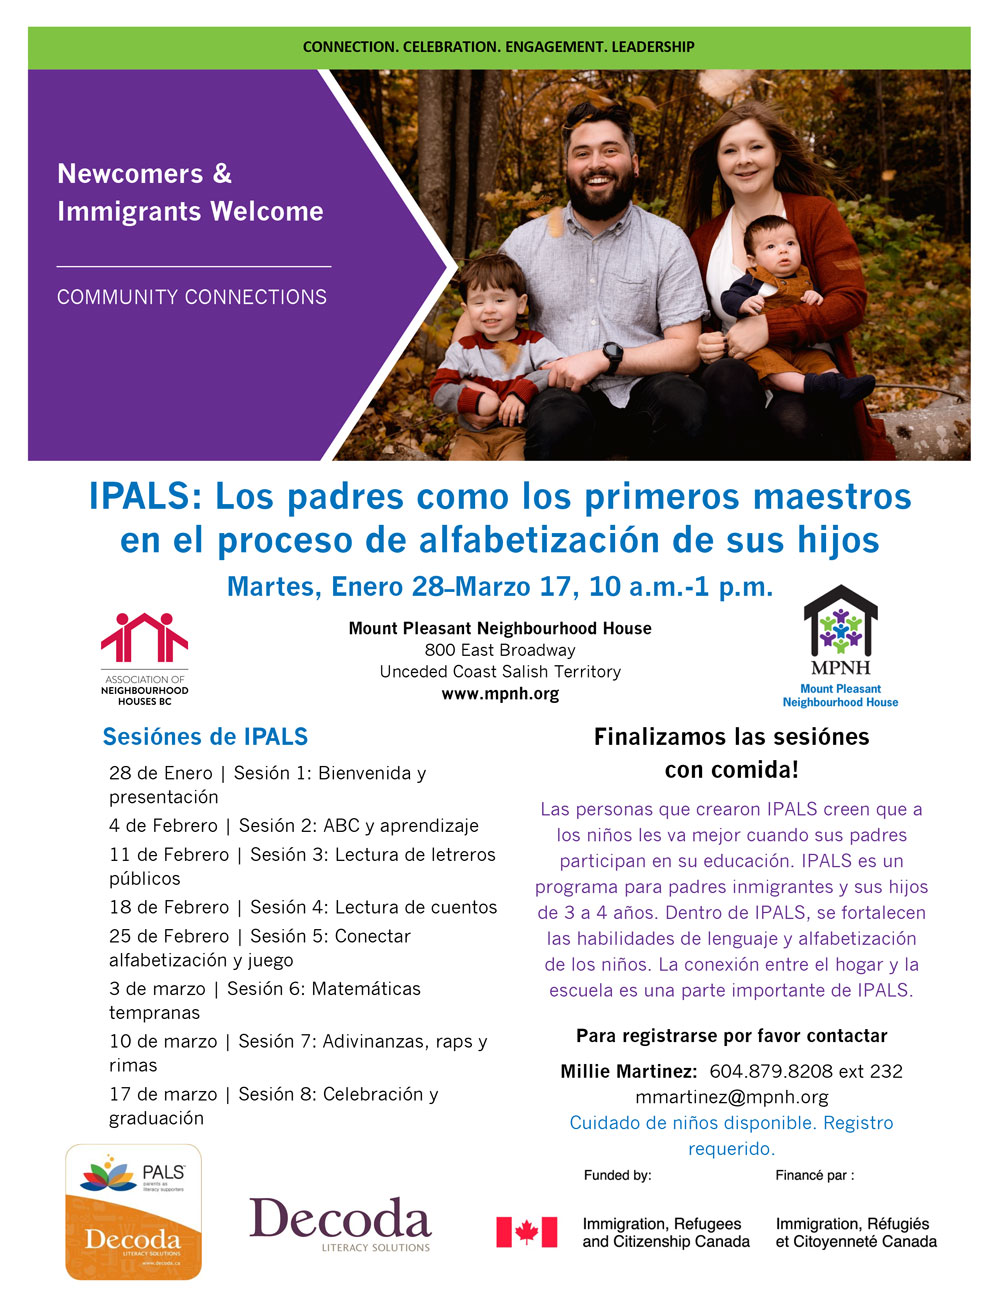 An image of the poster with program details, featuring a phot of two parents with two young children outdoors